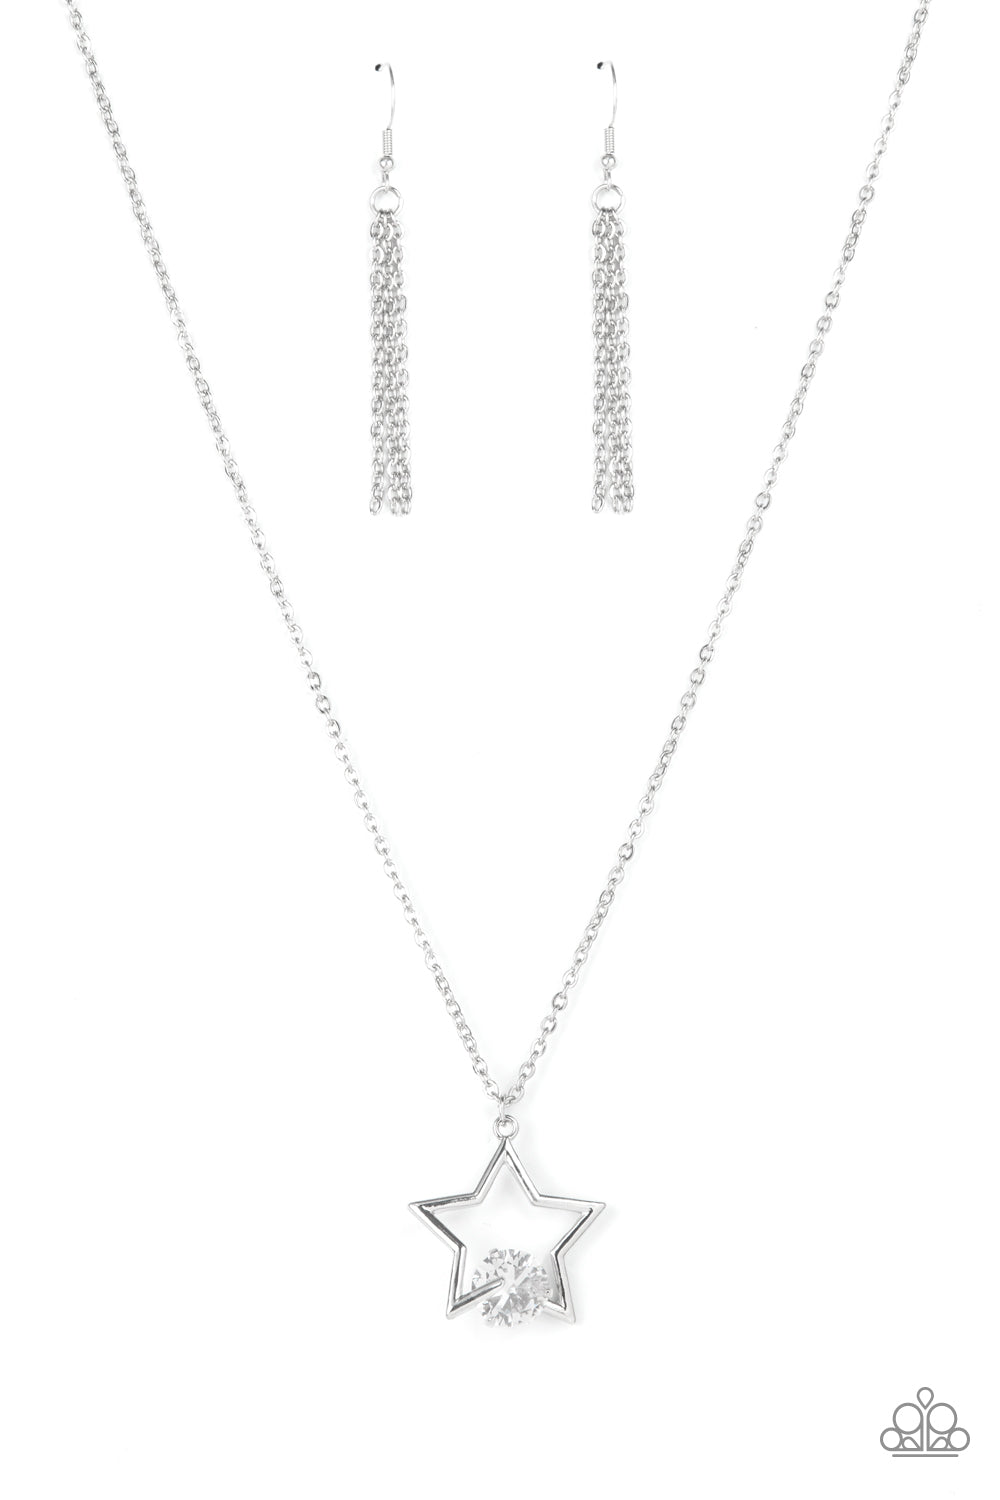 Starry Fireworks Necklace - White